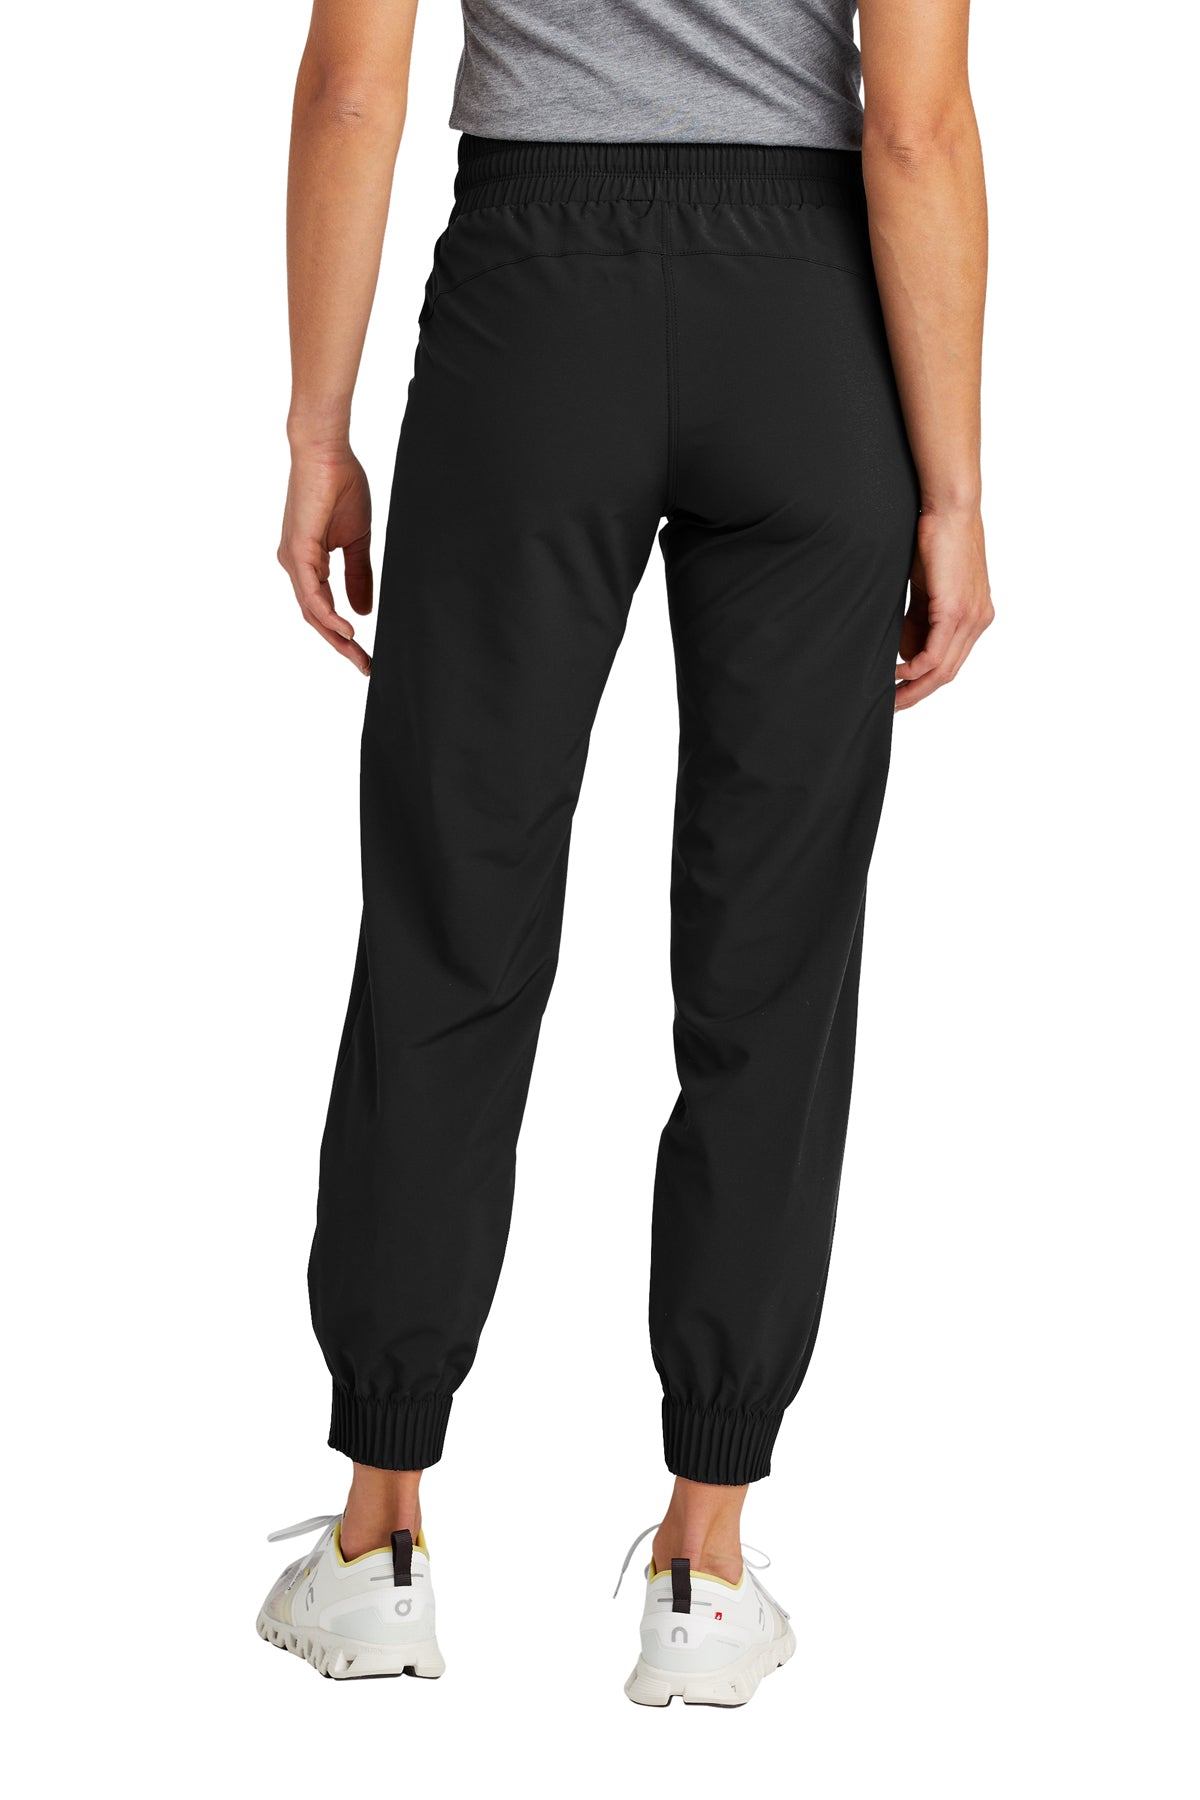 FiA OGIO Ladies Connection Jogger - Made to Order